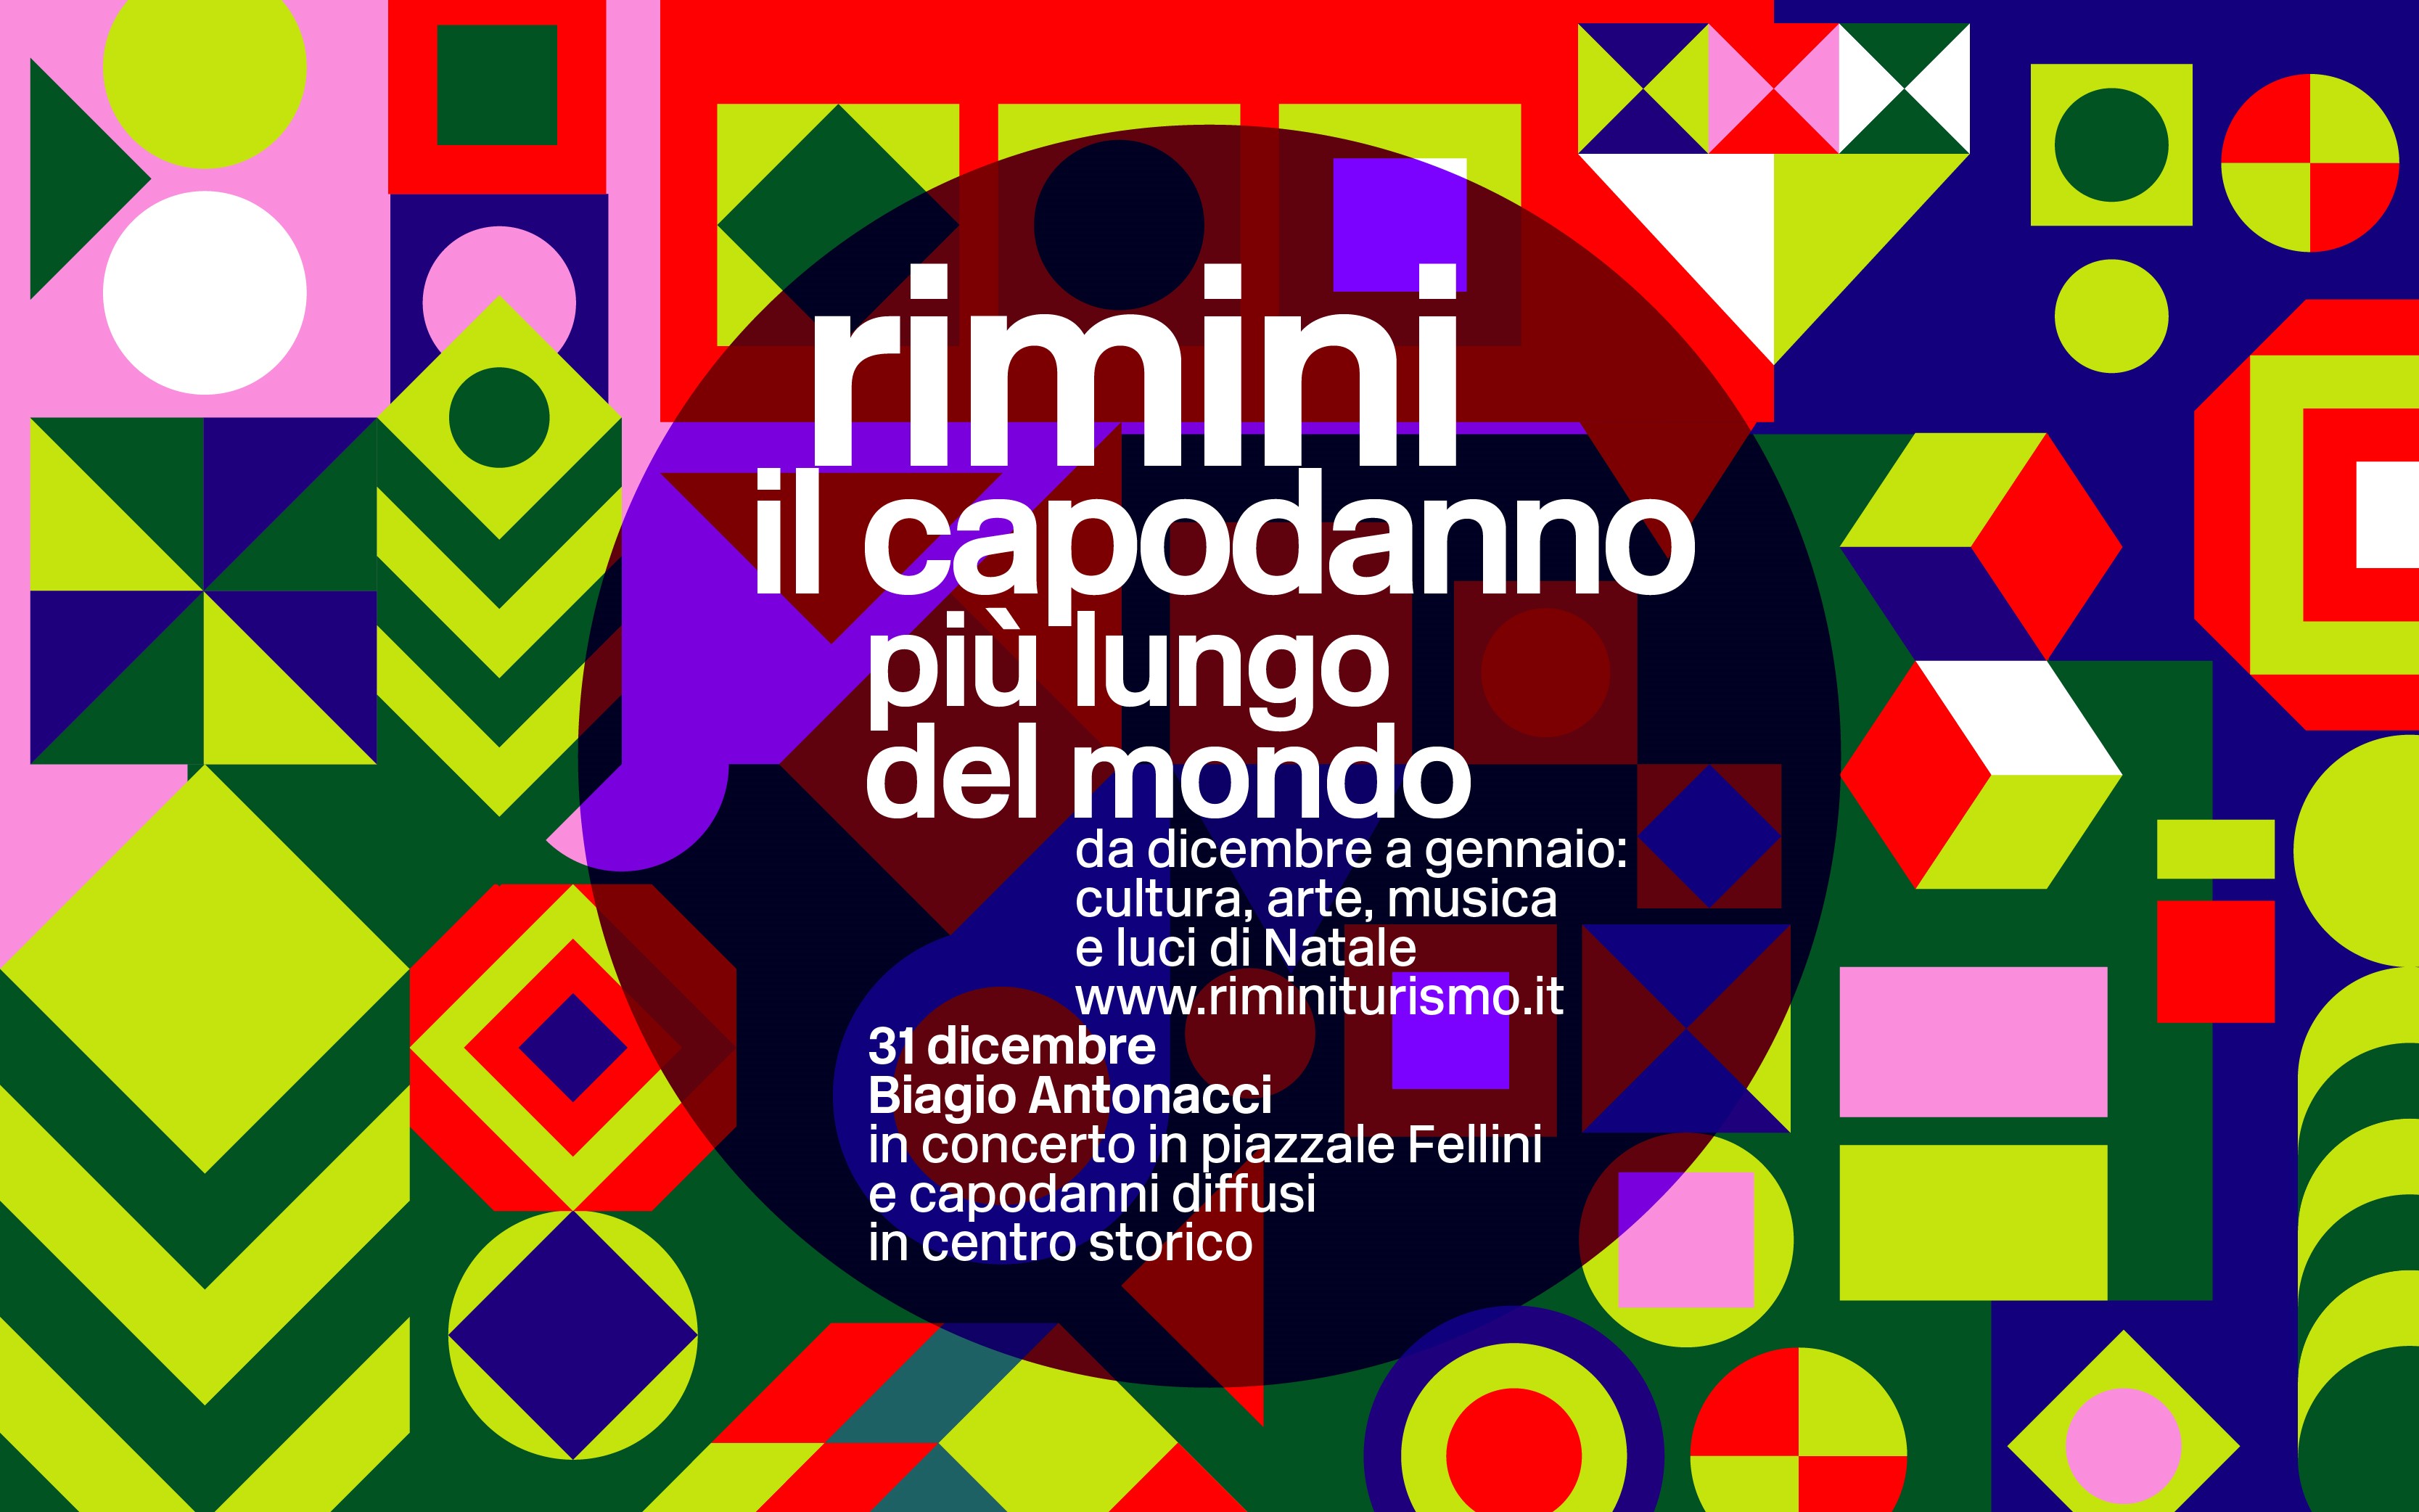 Rimini - the longest New Year’s eve in the world